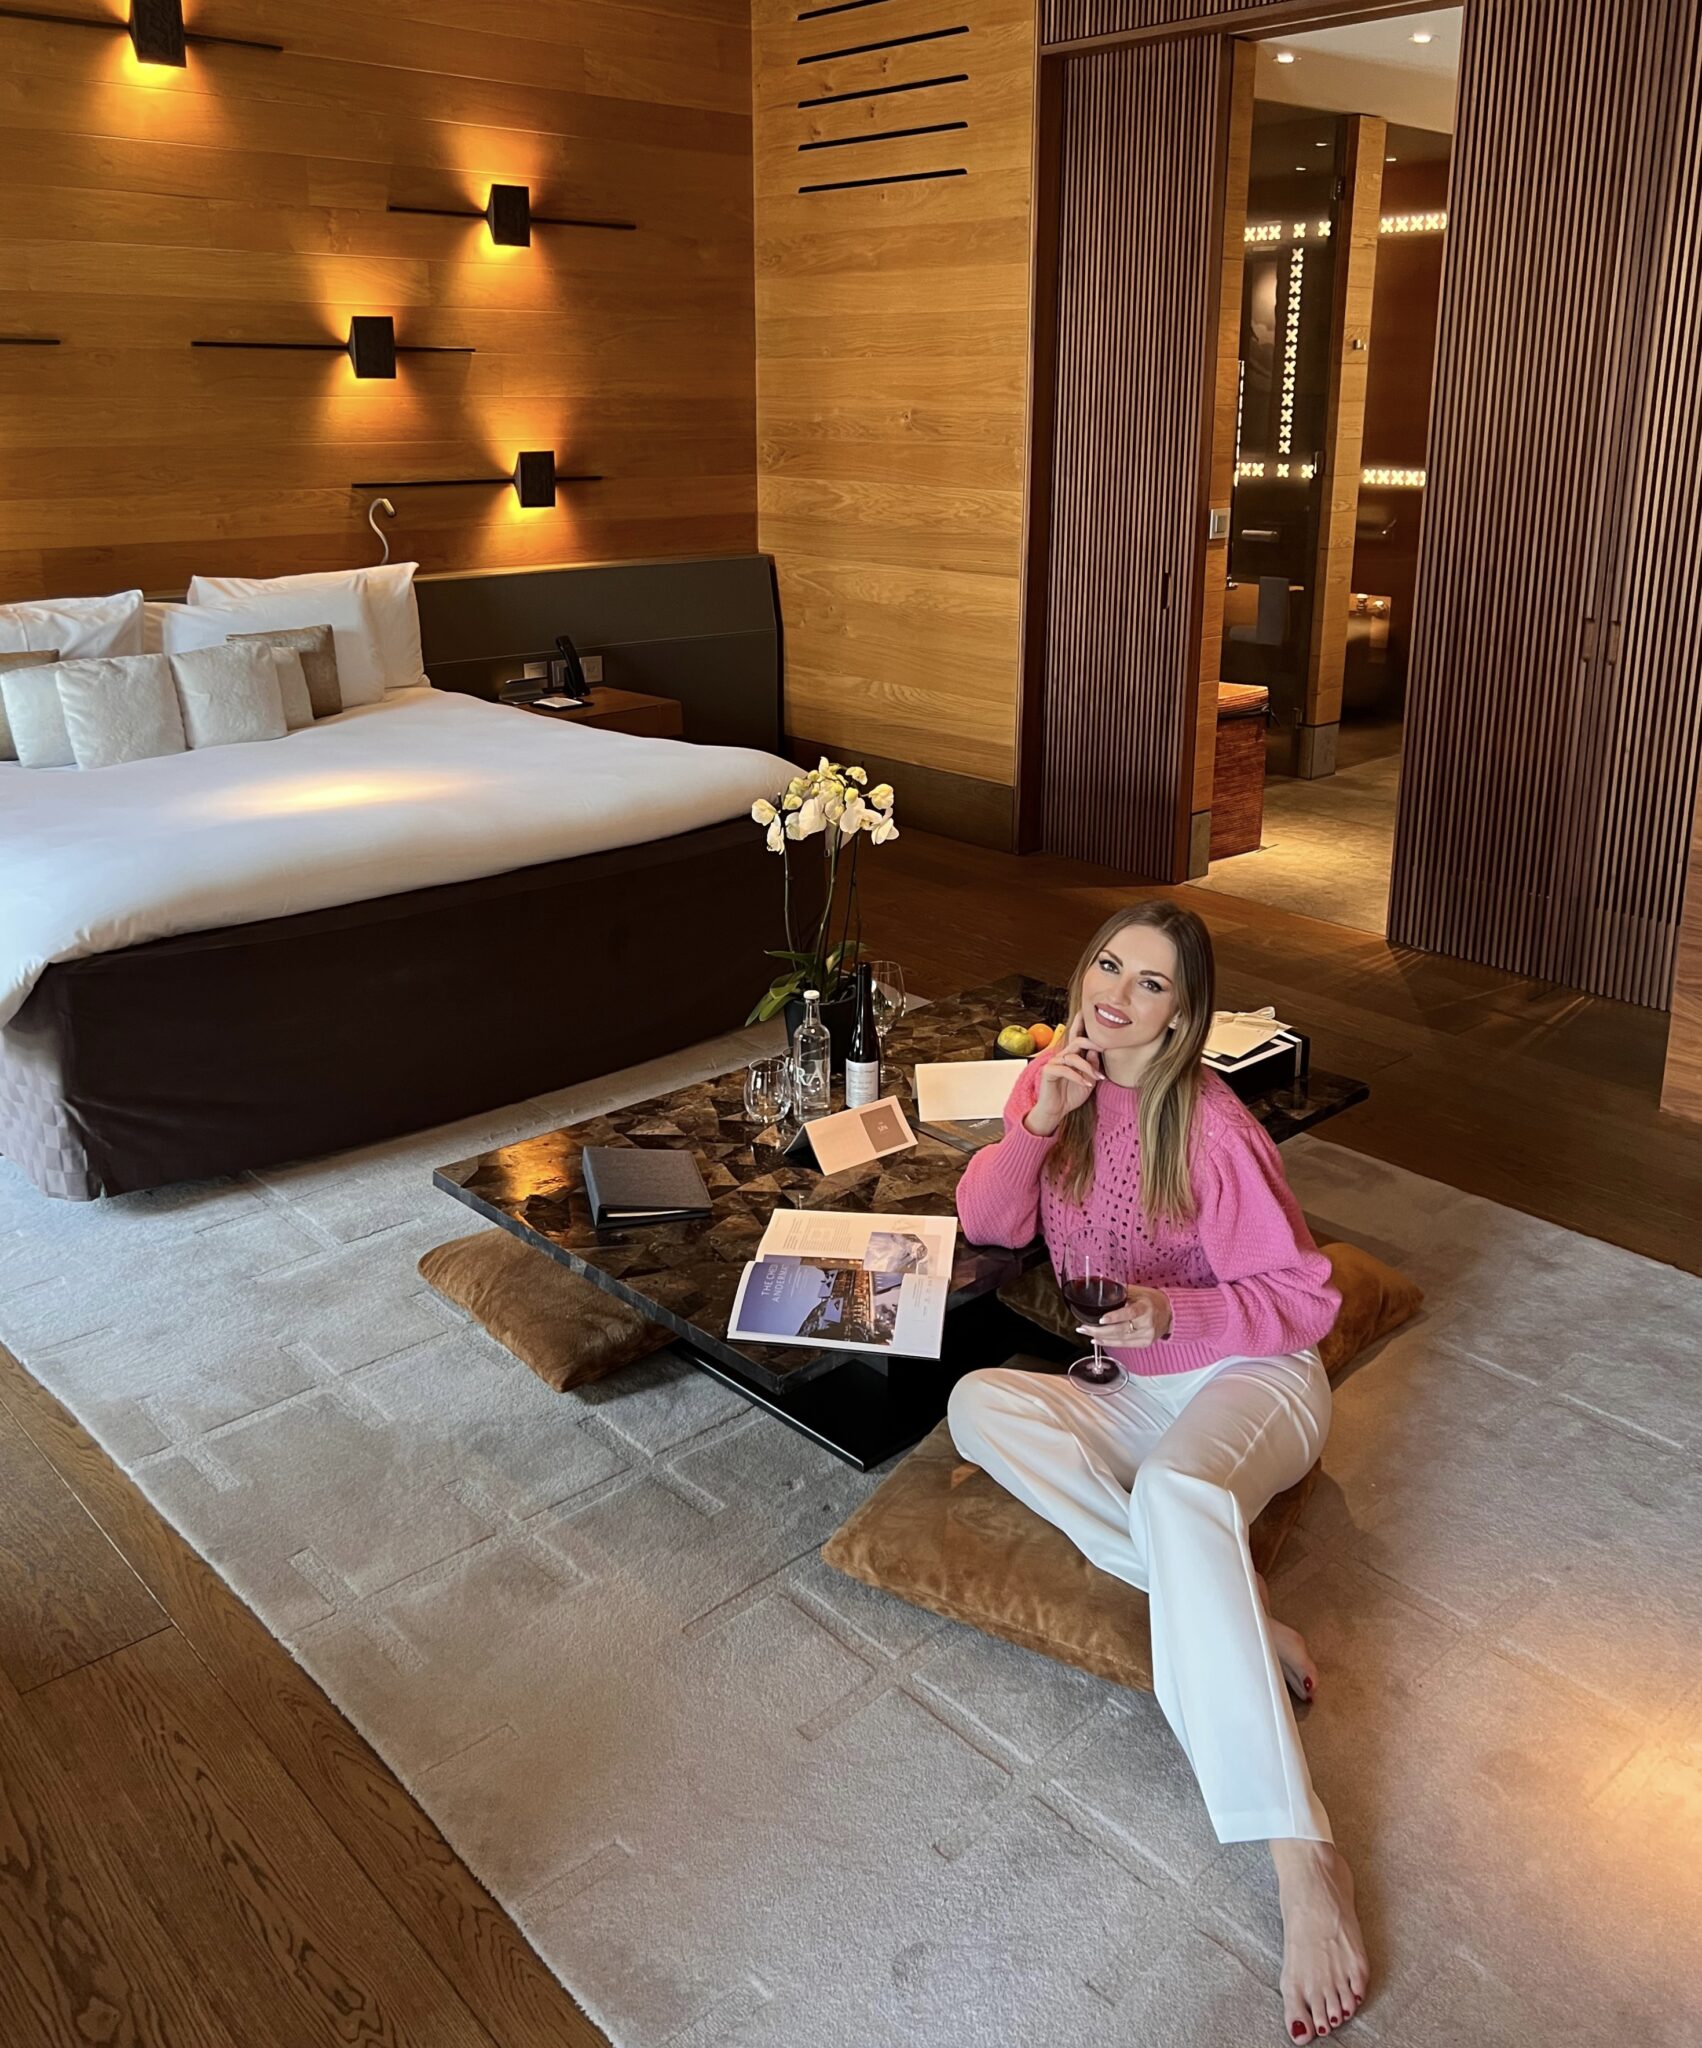 THE CHEDI ANDERMATT - Understated Luxury in the Swiss Alps. Review of The Chedi Hotel in Andermatt, number 1 in Switzerland. 3